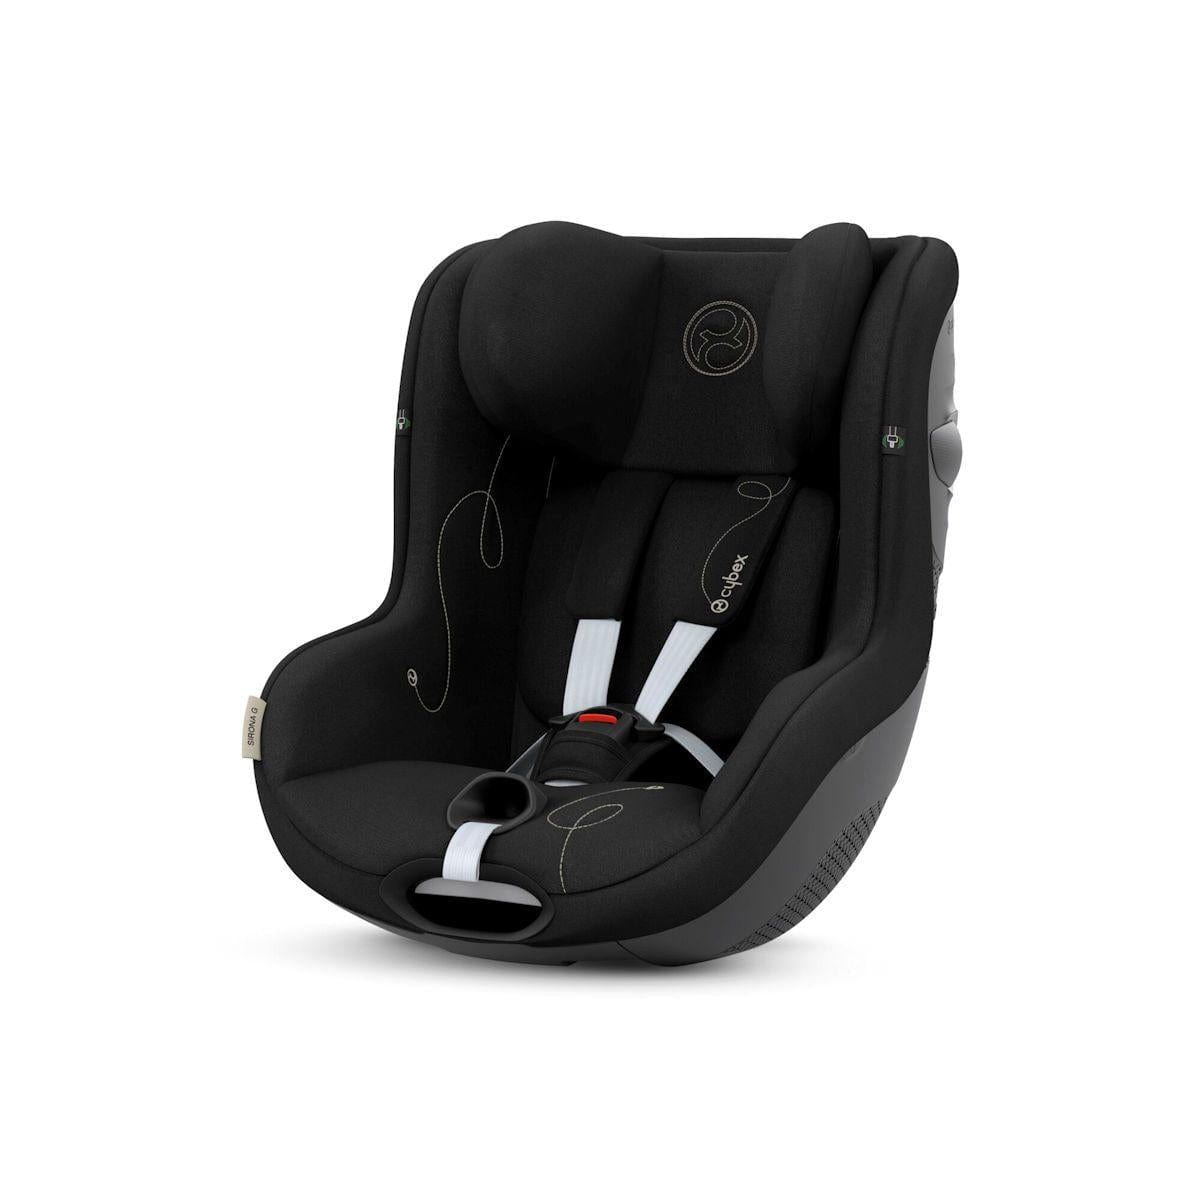 Cybex Sirona S i-Size Child Car Seat - Deep Black for sale online